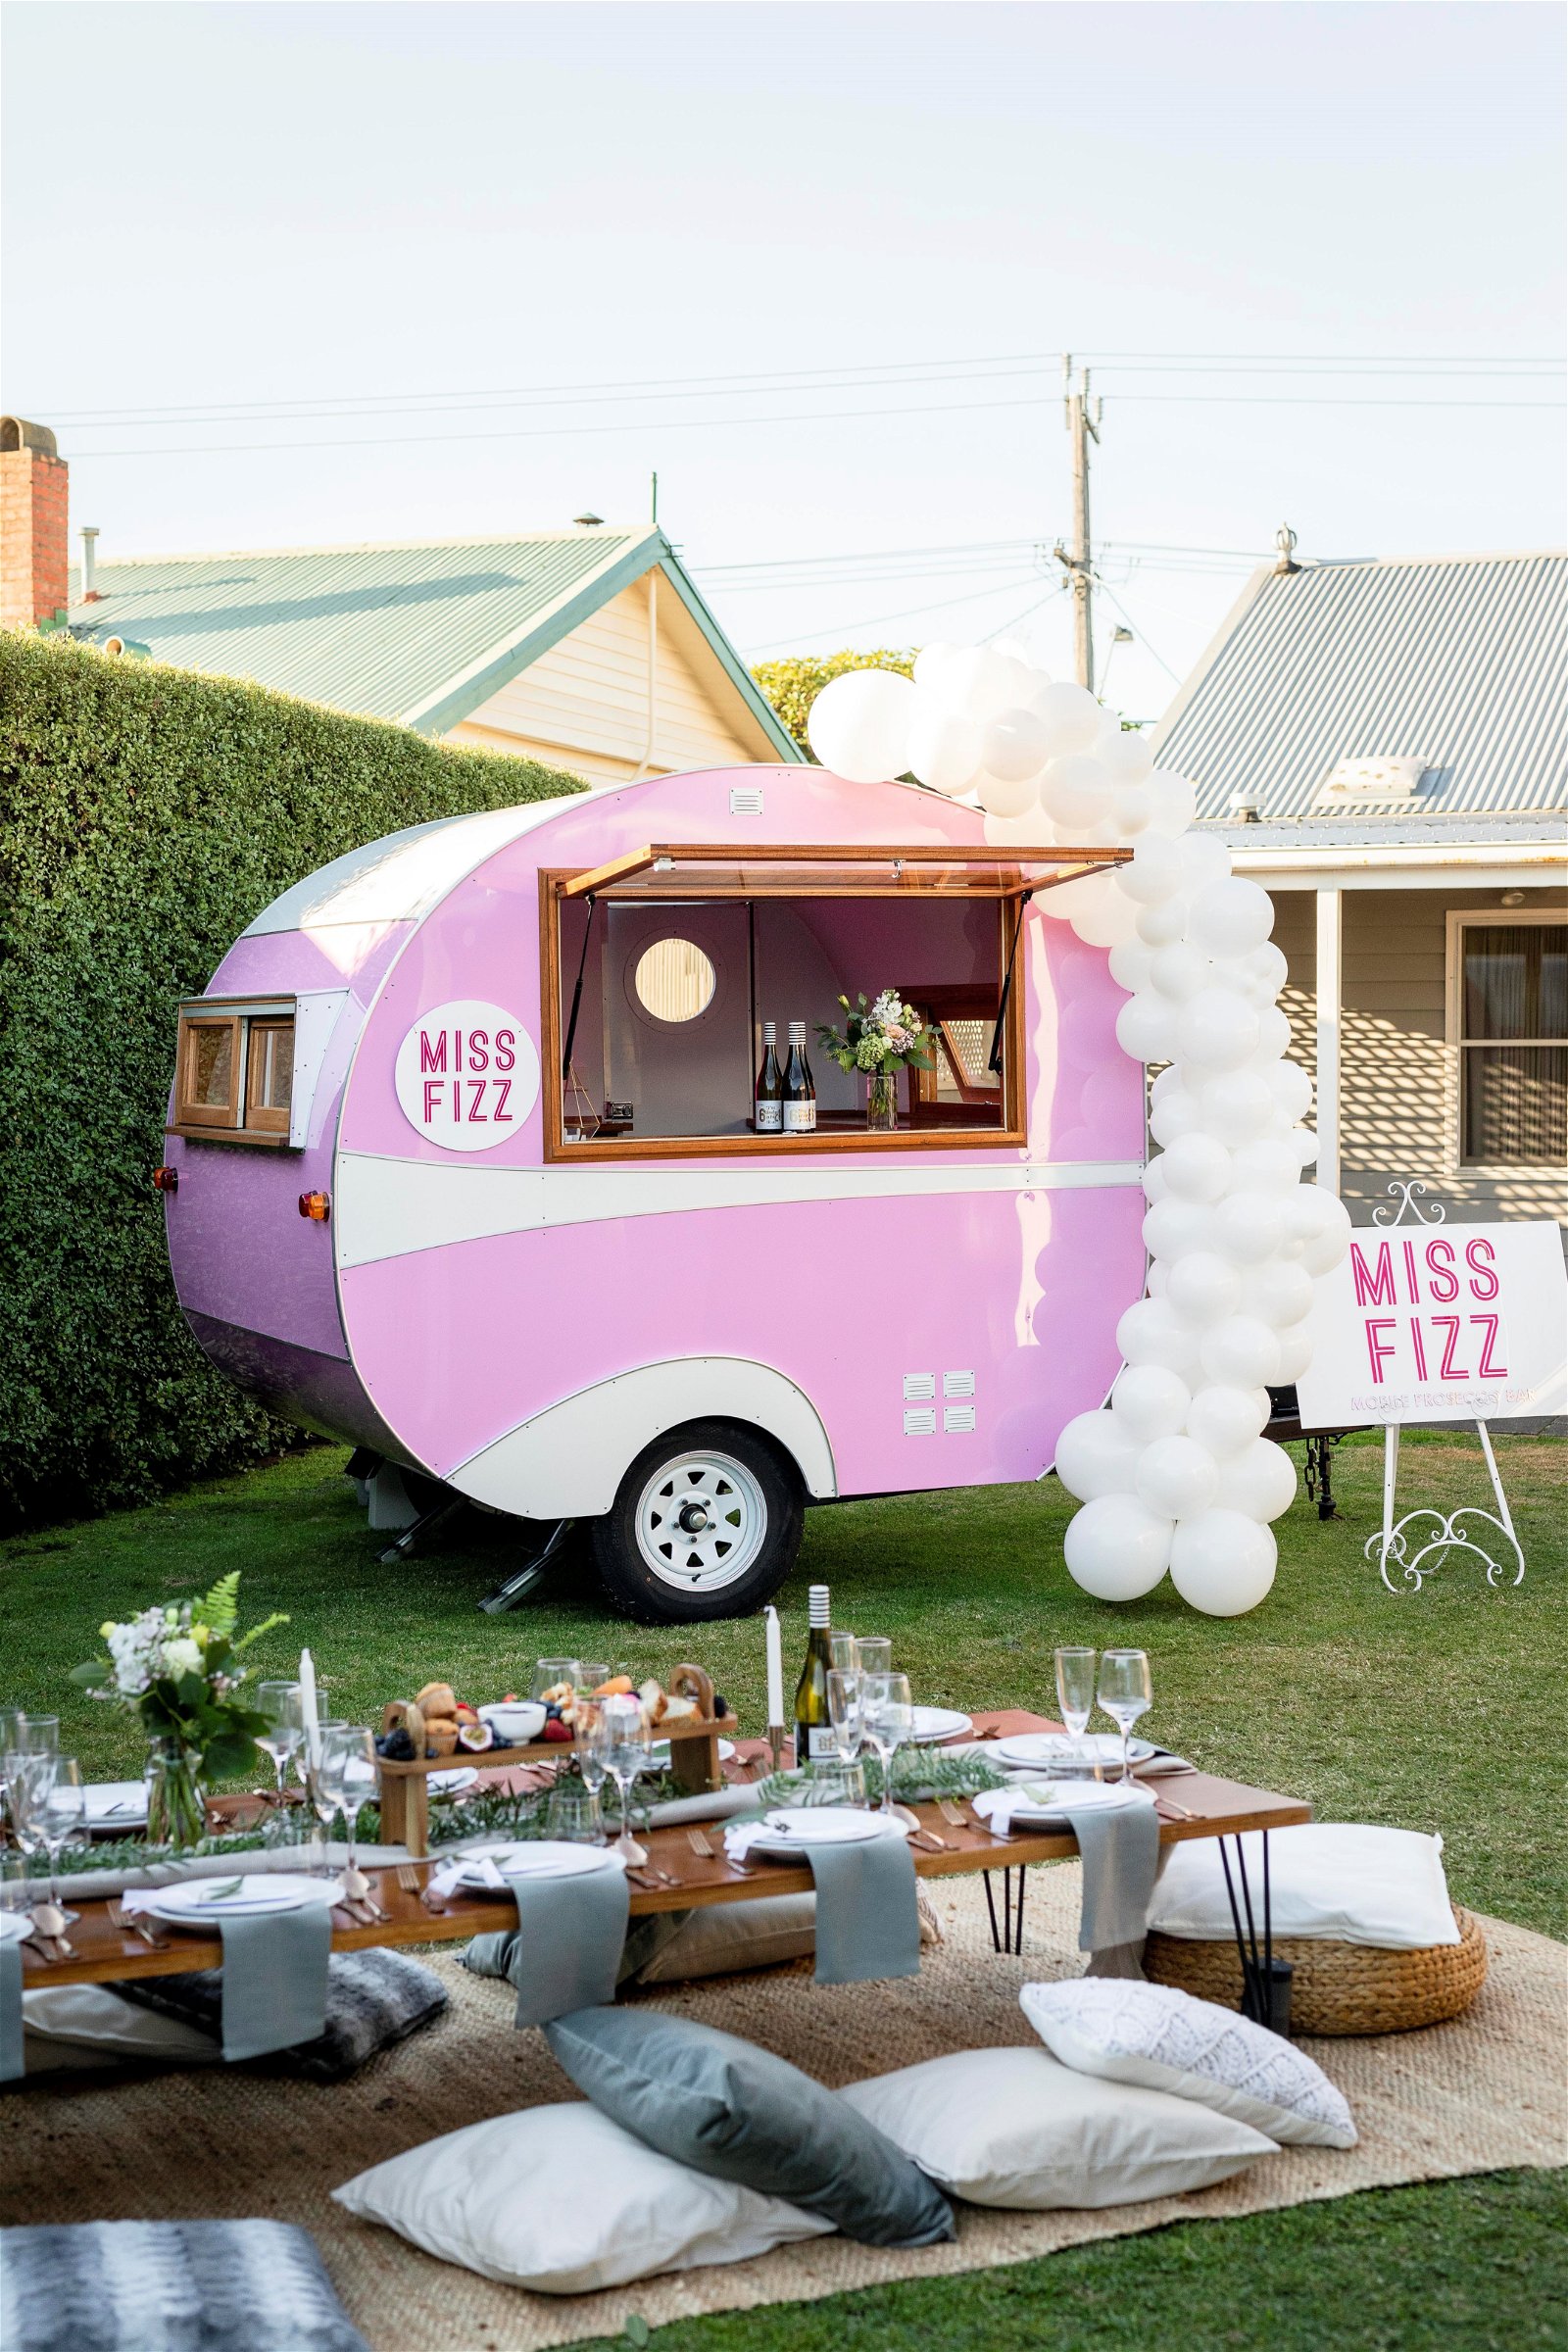 Miss Fizz - Mobile Prosecco Bar - Northern Rivers Accommodation